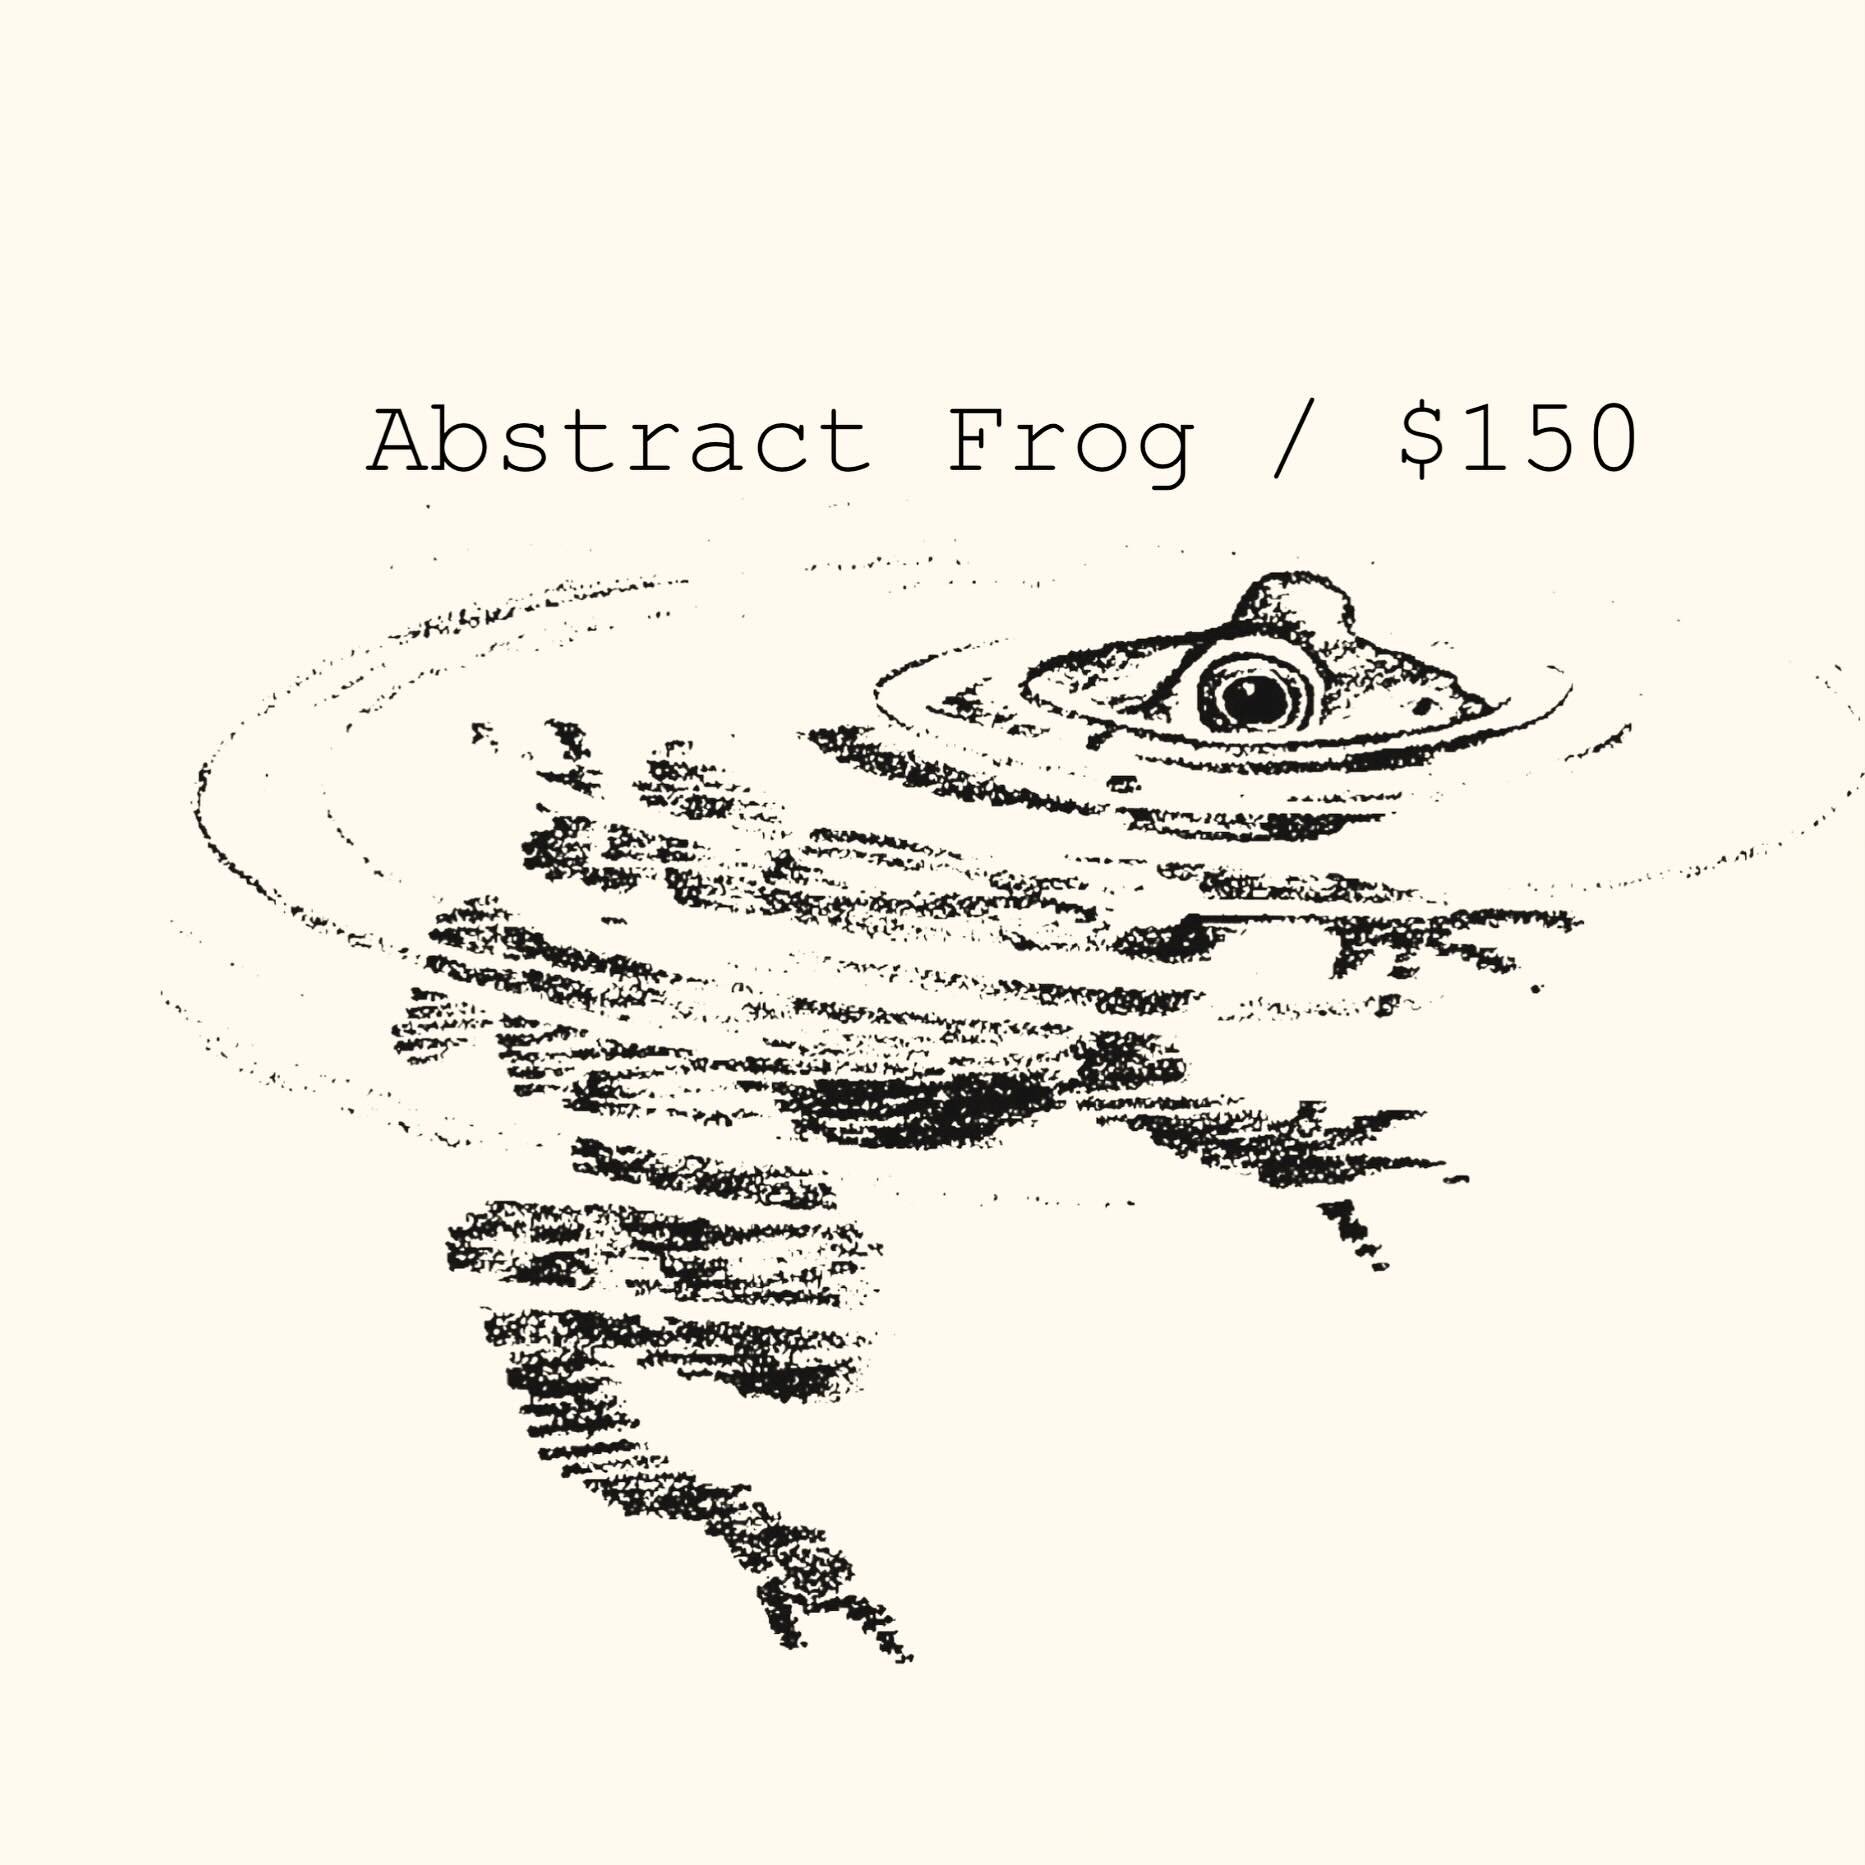 Abstract Frog I&rsquo;d love to do!
Price varies depending on size.
DM for info or to claim him 🐸
.
.
.
.
.
#frog #frogtattoo #abstracttattoo